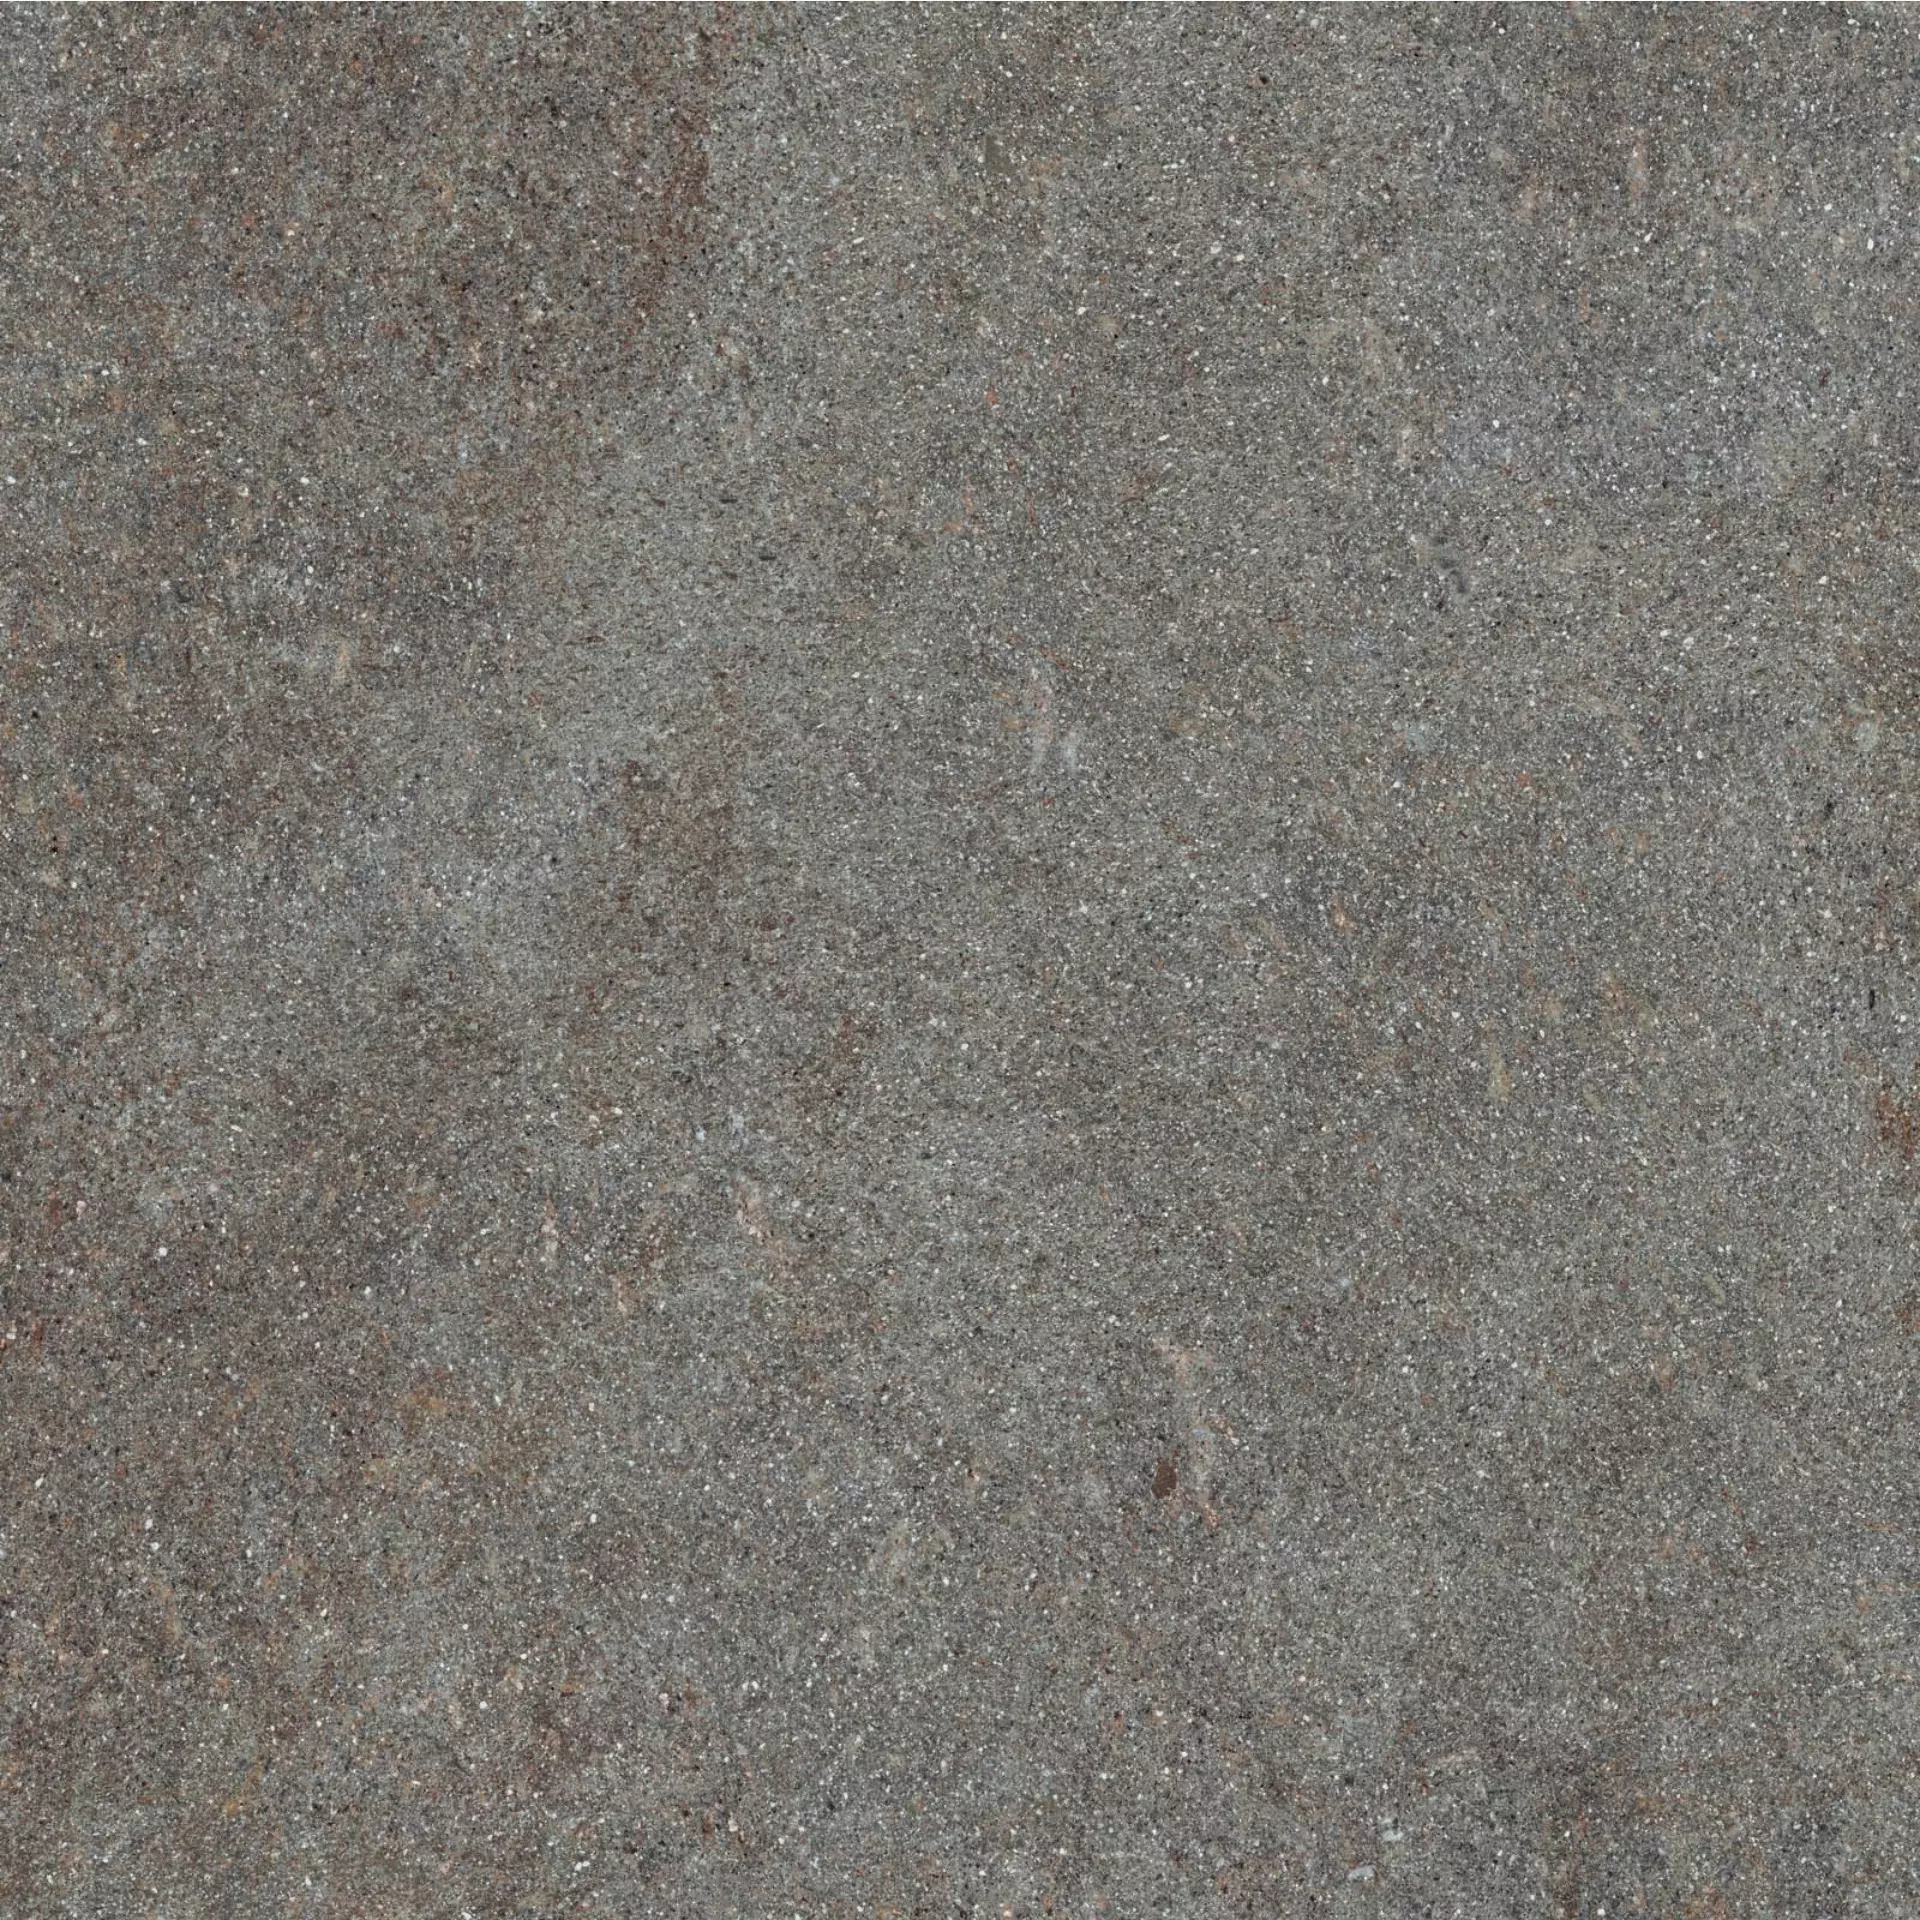 ABK Out.20 Native Fog Naturale Outdoor PF60004220 90x90cm rectified 20mm